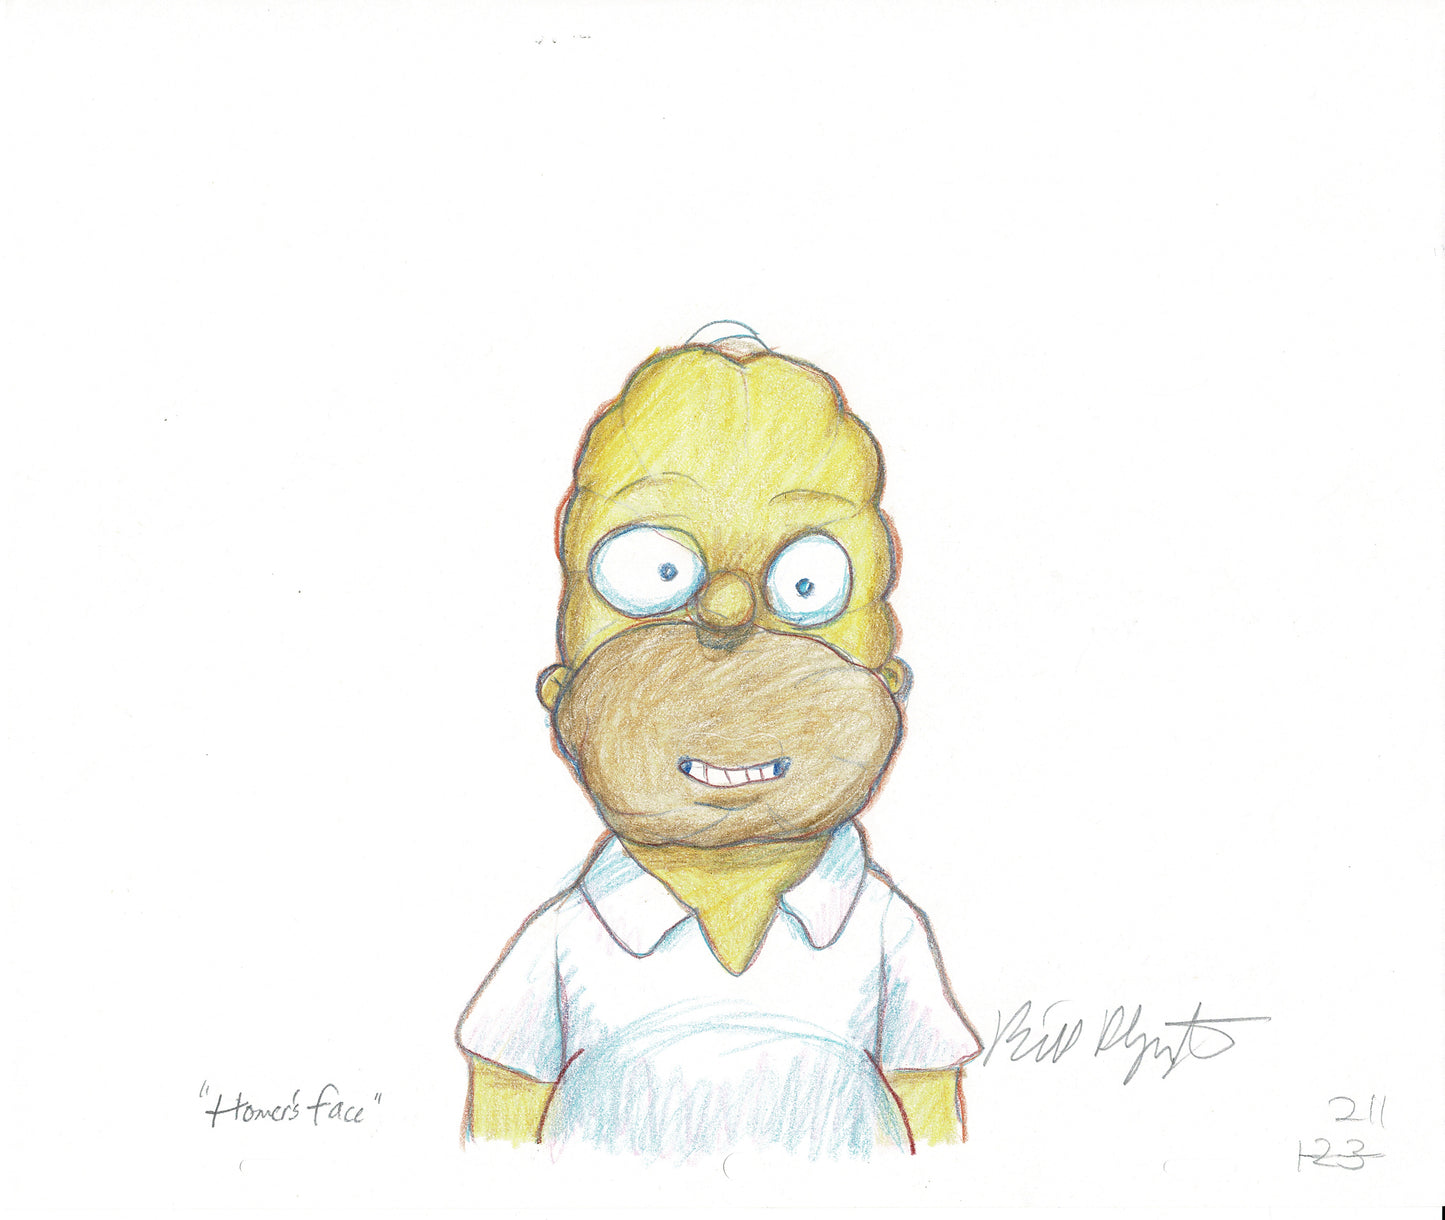 The Simpsons Bill Plympton Signed Homer Couch Gag Original Production Drawings LOT OF 3 Fox 2018